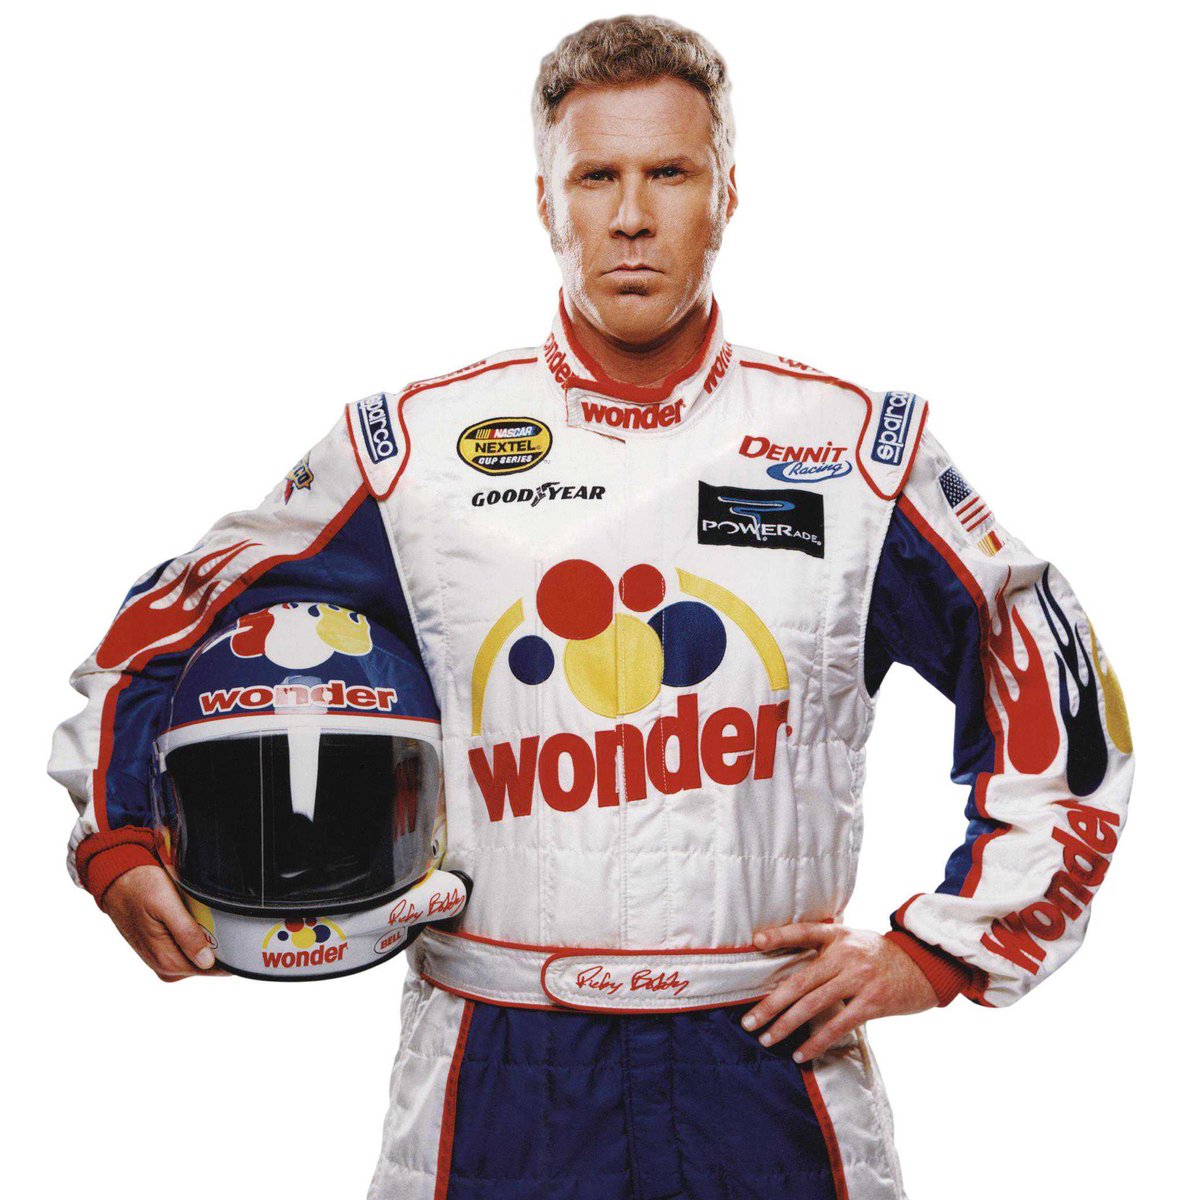 Easy Tiger On Twitter Shake And Bake With Ricky Bobby At Tmrw Night S Free Screening Of Talladega Nights At 9pm Grab A Lonestarbeer 4 Hot Dog Special Too Https T Co Z5ewgopyin